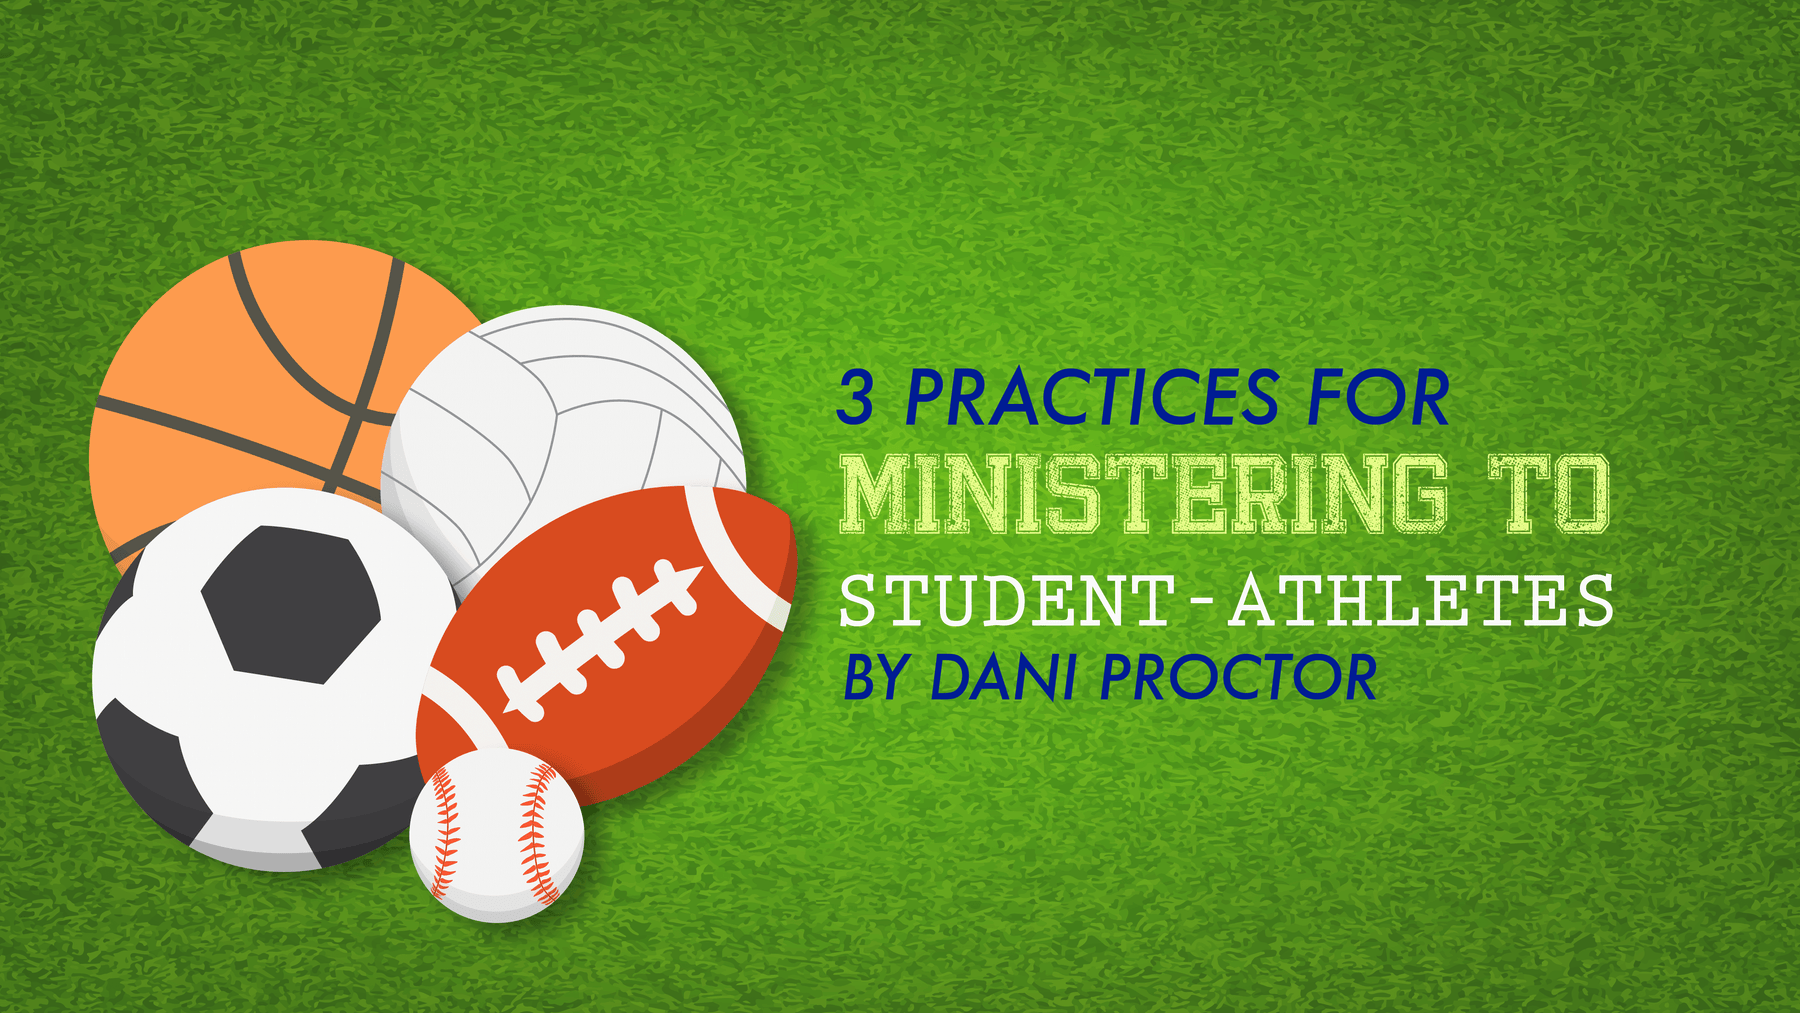 3 Practices for Ministering to Student-Athletes